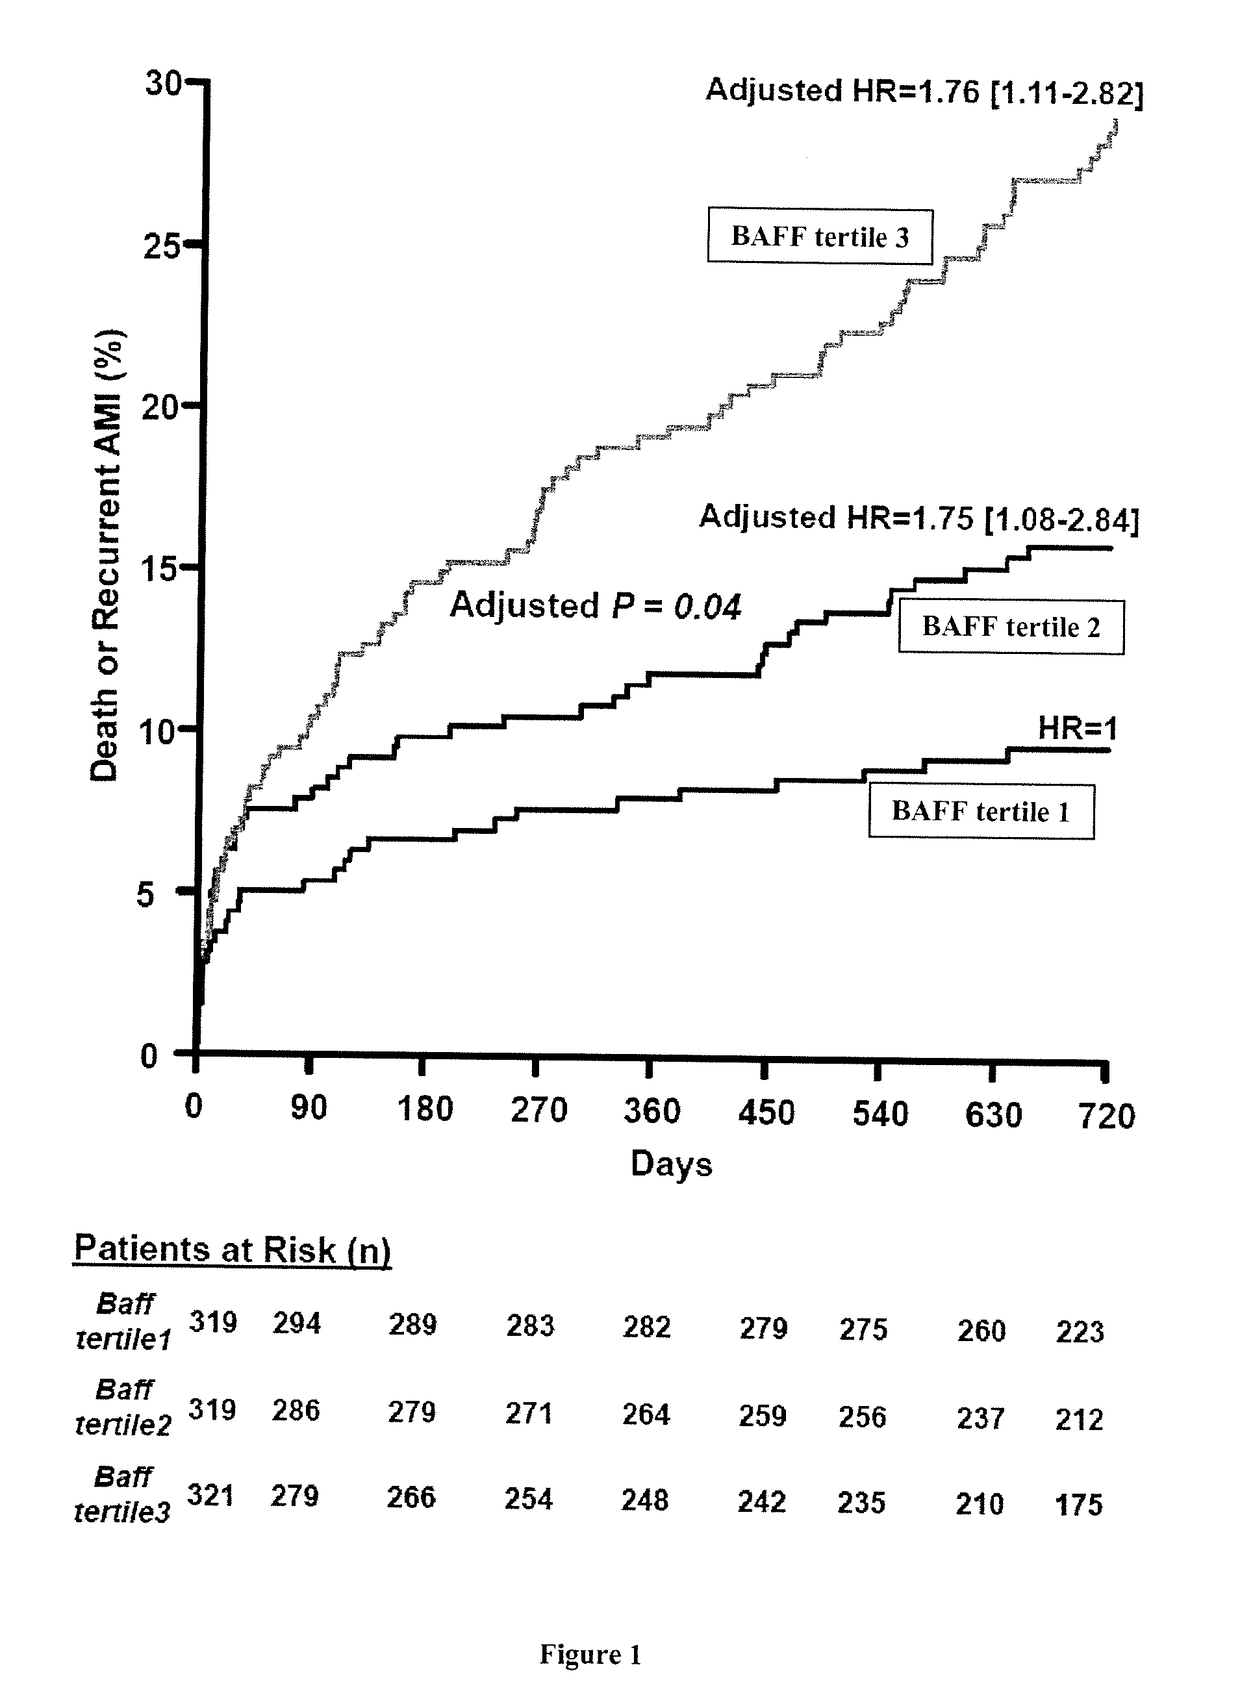 Method of predicting survival time in myocardial infarction patients by measuring BAFF levels